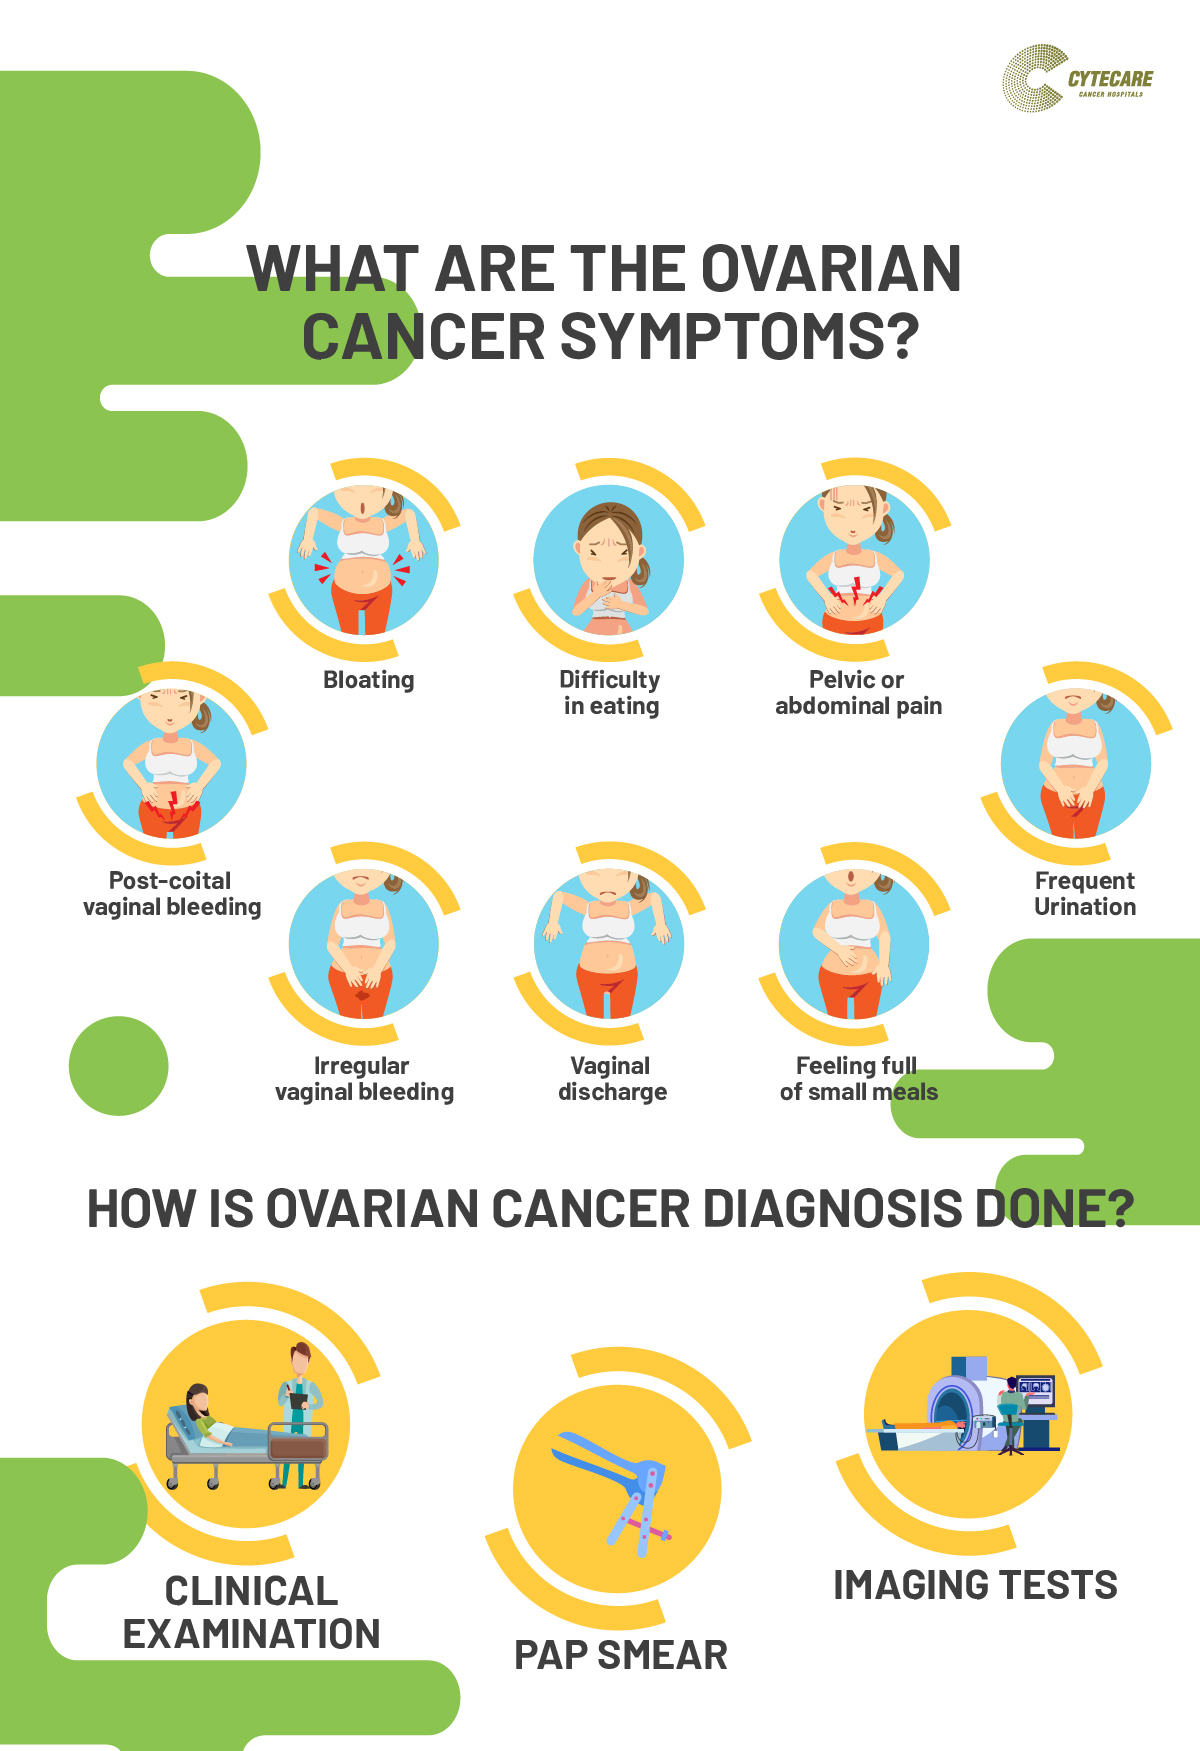 Ovarian cancer from cyst. Ovarian cancer or cysts